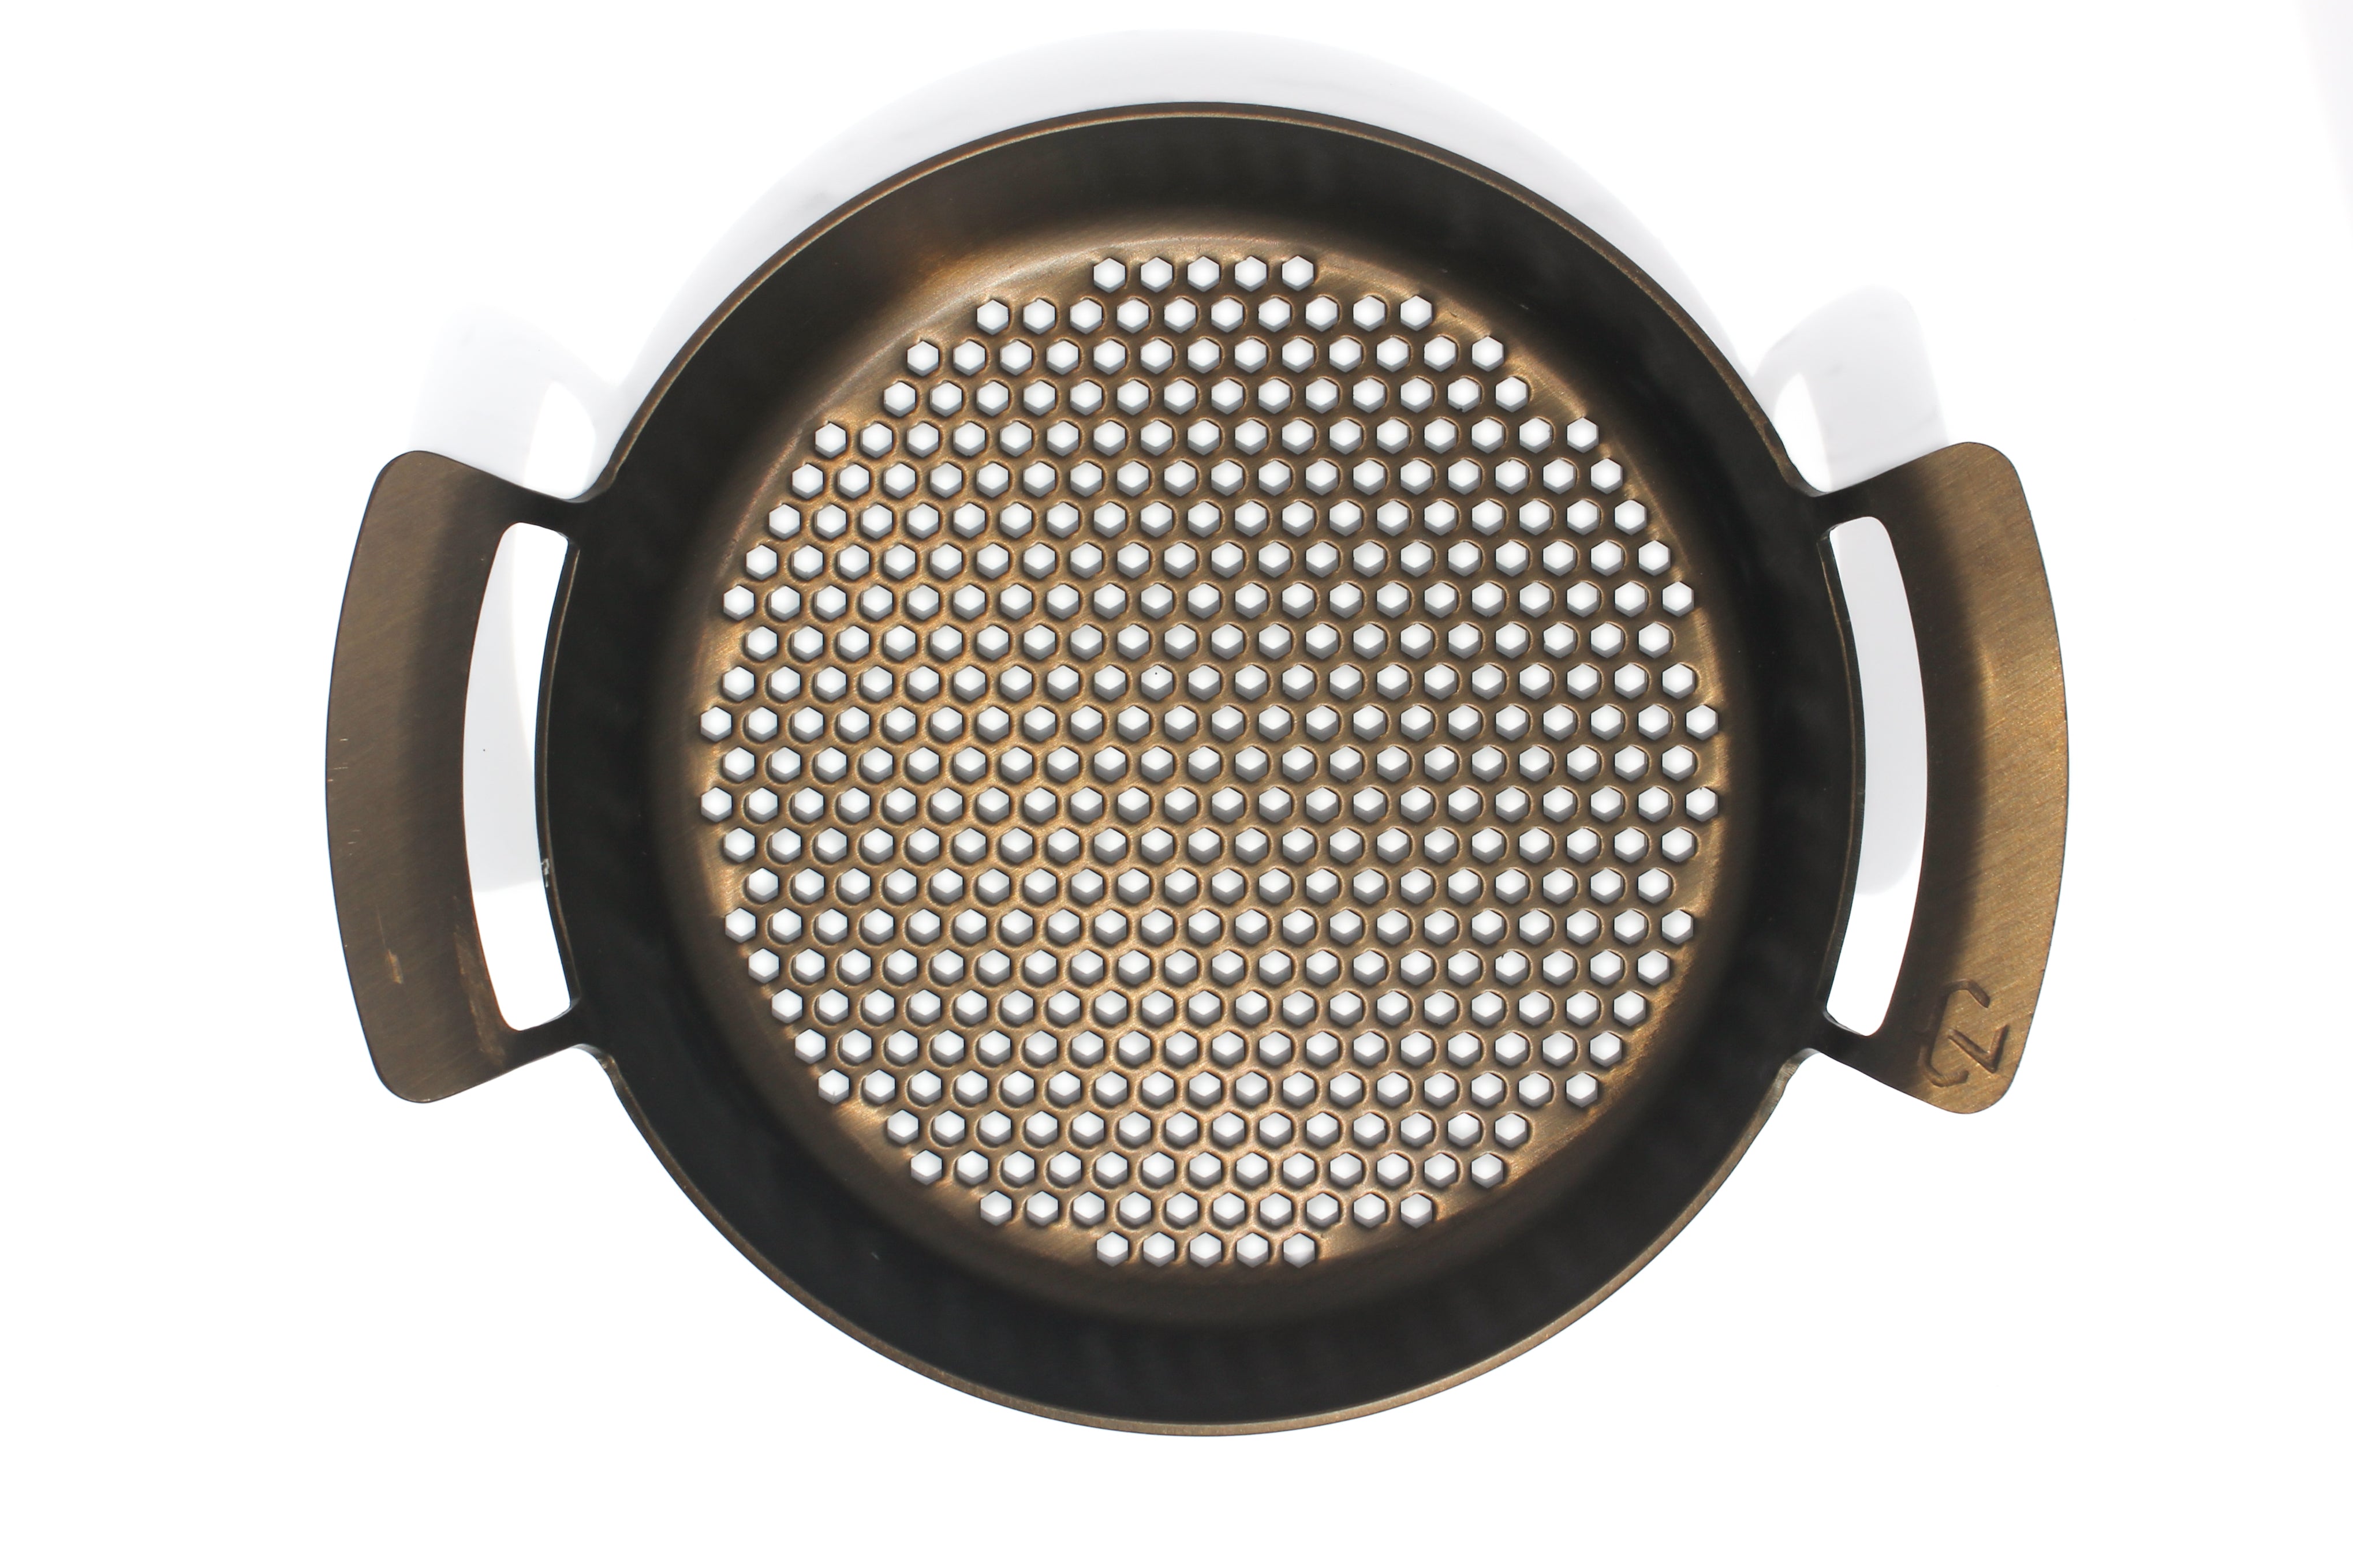 Cast-A-Way Carbon Grill Pioneer Pan